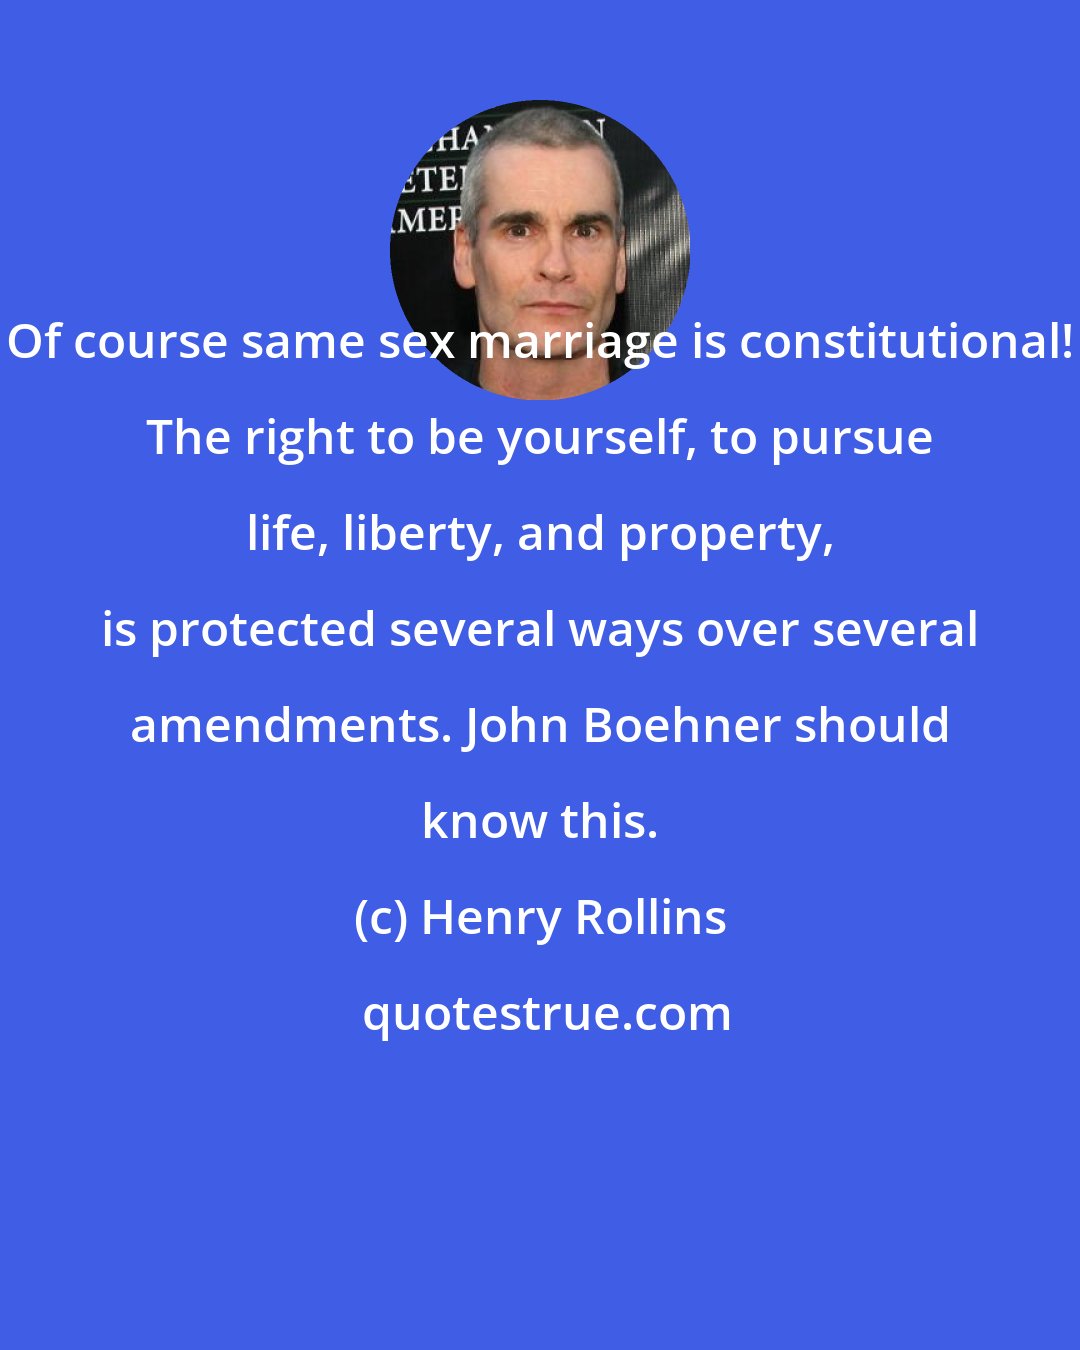 Henry Rollins: Of course same sex marriage is constitutional! The right to be yourself, to pursue life, liberty, and property, is protected several ways over several amendments. John Boehner should know this.